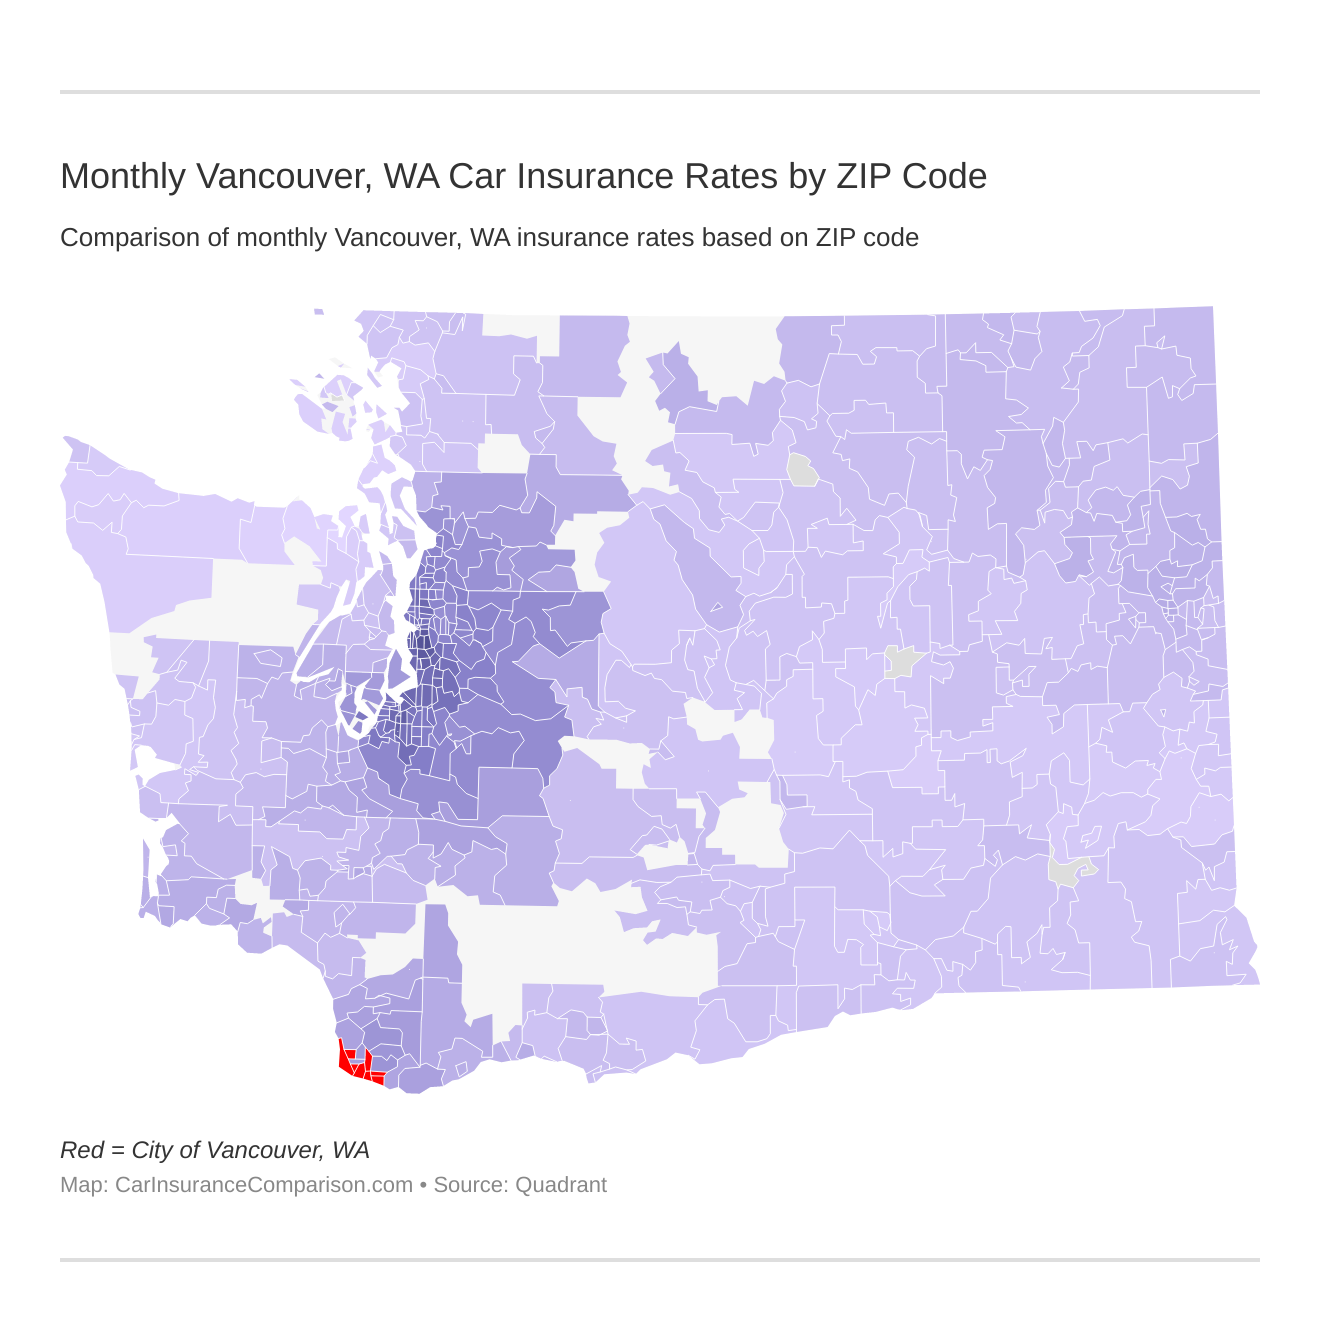 Monthly Vancouver, WA Car Insurance Rates by ZIP Code